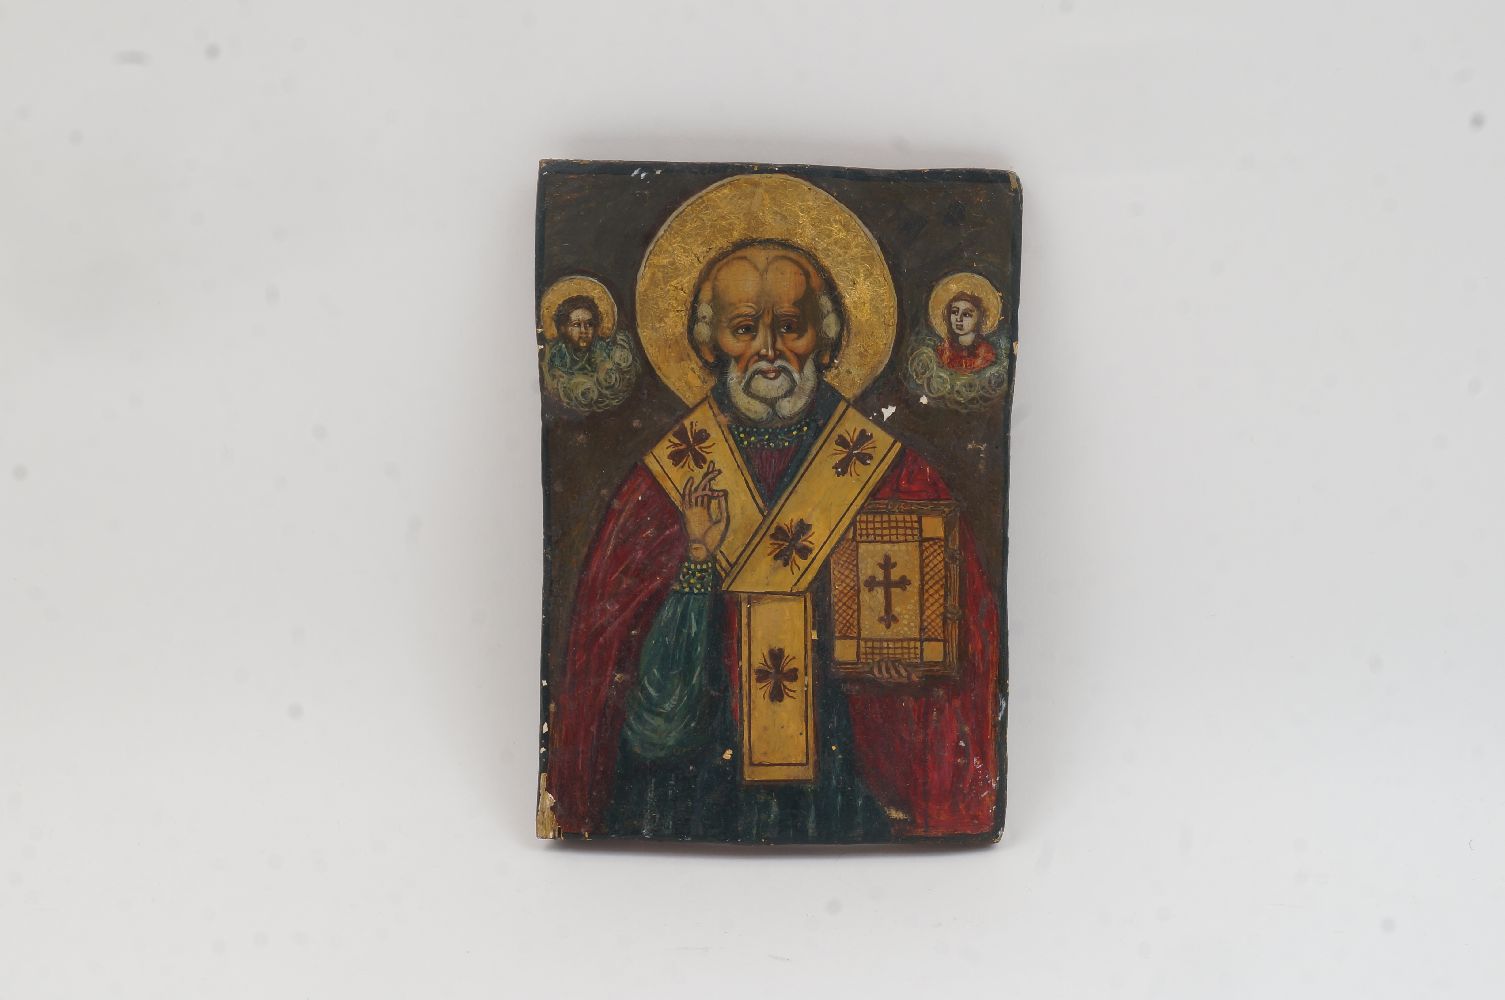 Two Russian icons, early 20th century, one depicting Christ ascended in clouds with a host of - Image 7 of 10